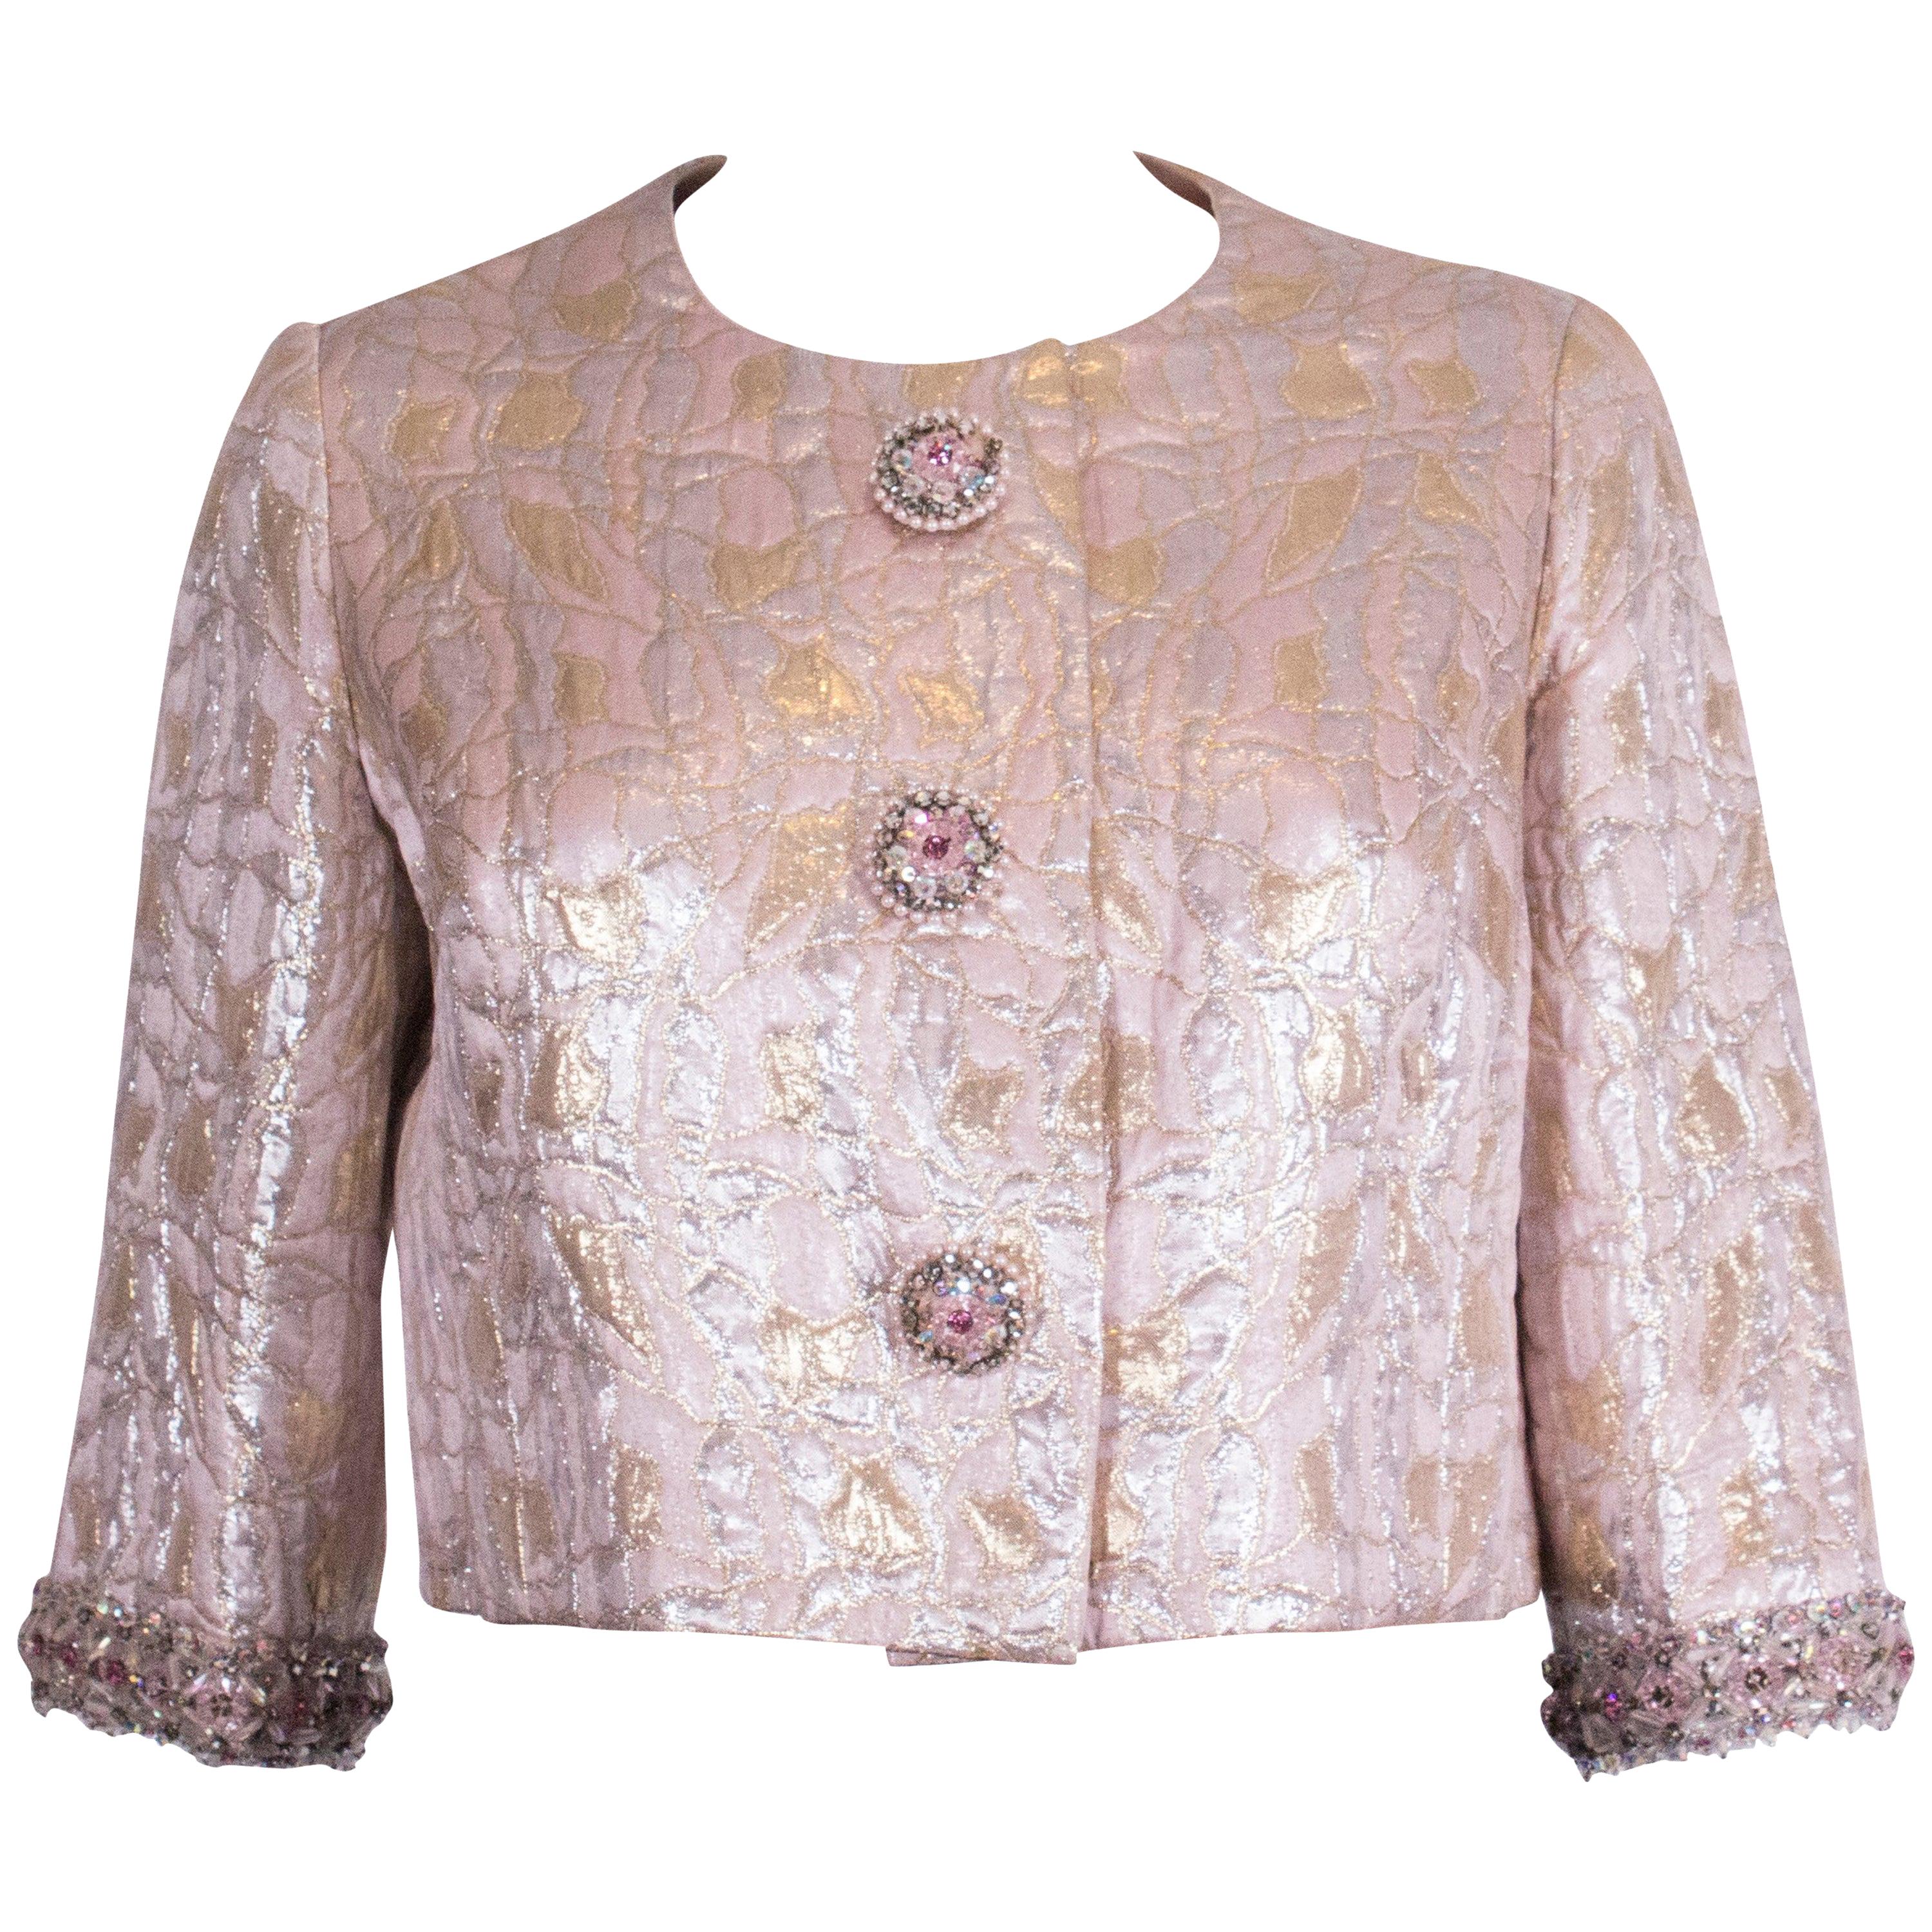   Vintage Pink, Gold and Silver jacket by Neymar Couture